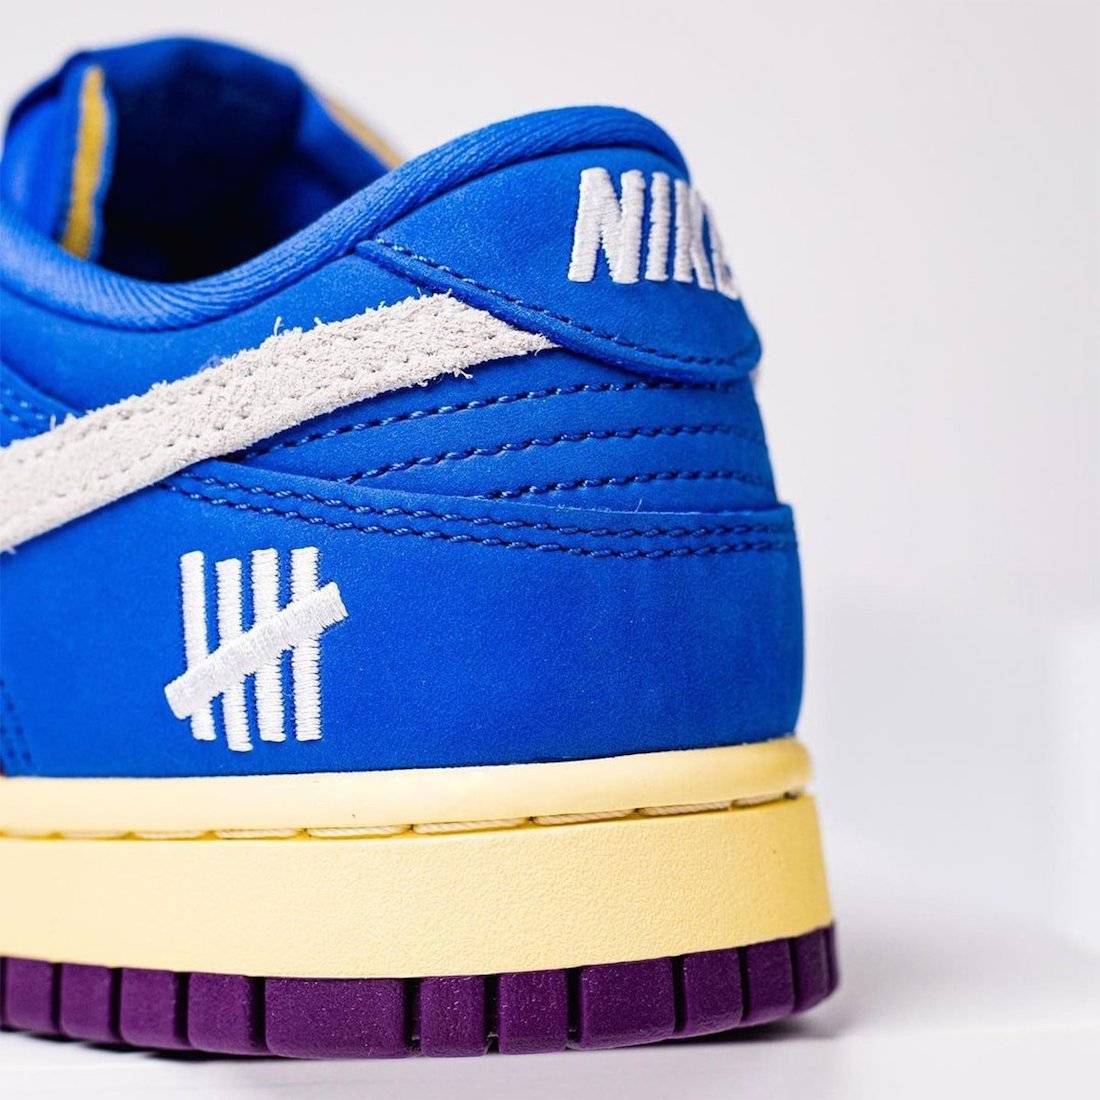 Undefeated-Nike-Dunk-Low-Blue-Purple-DH6508-400-Release-Date-8